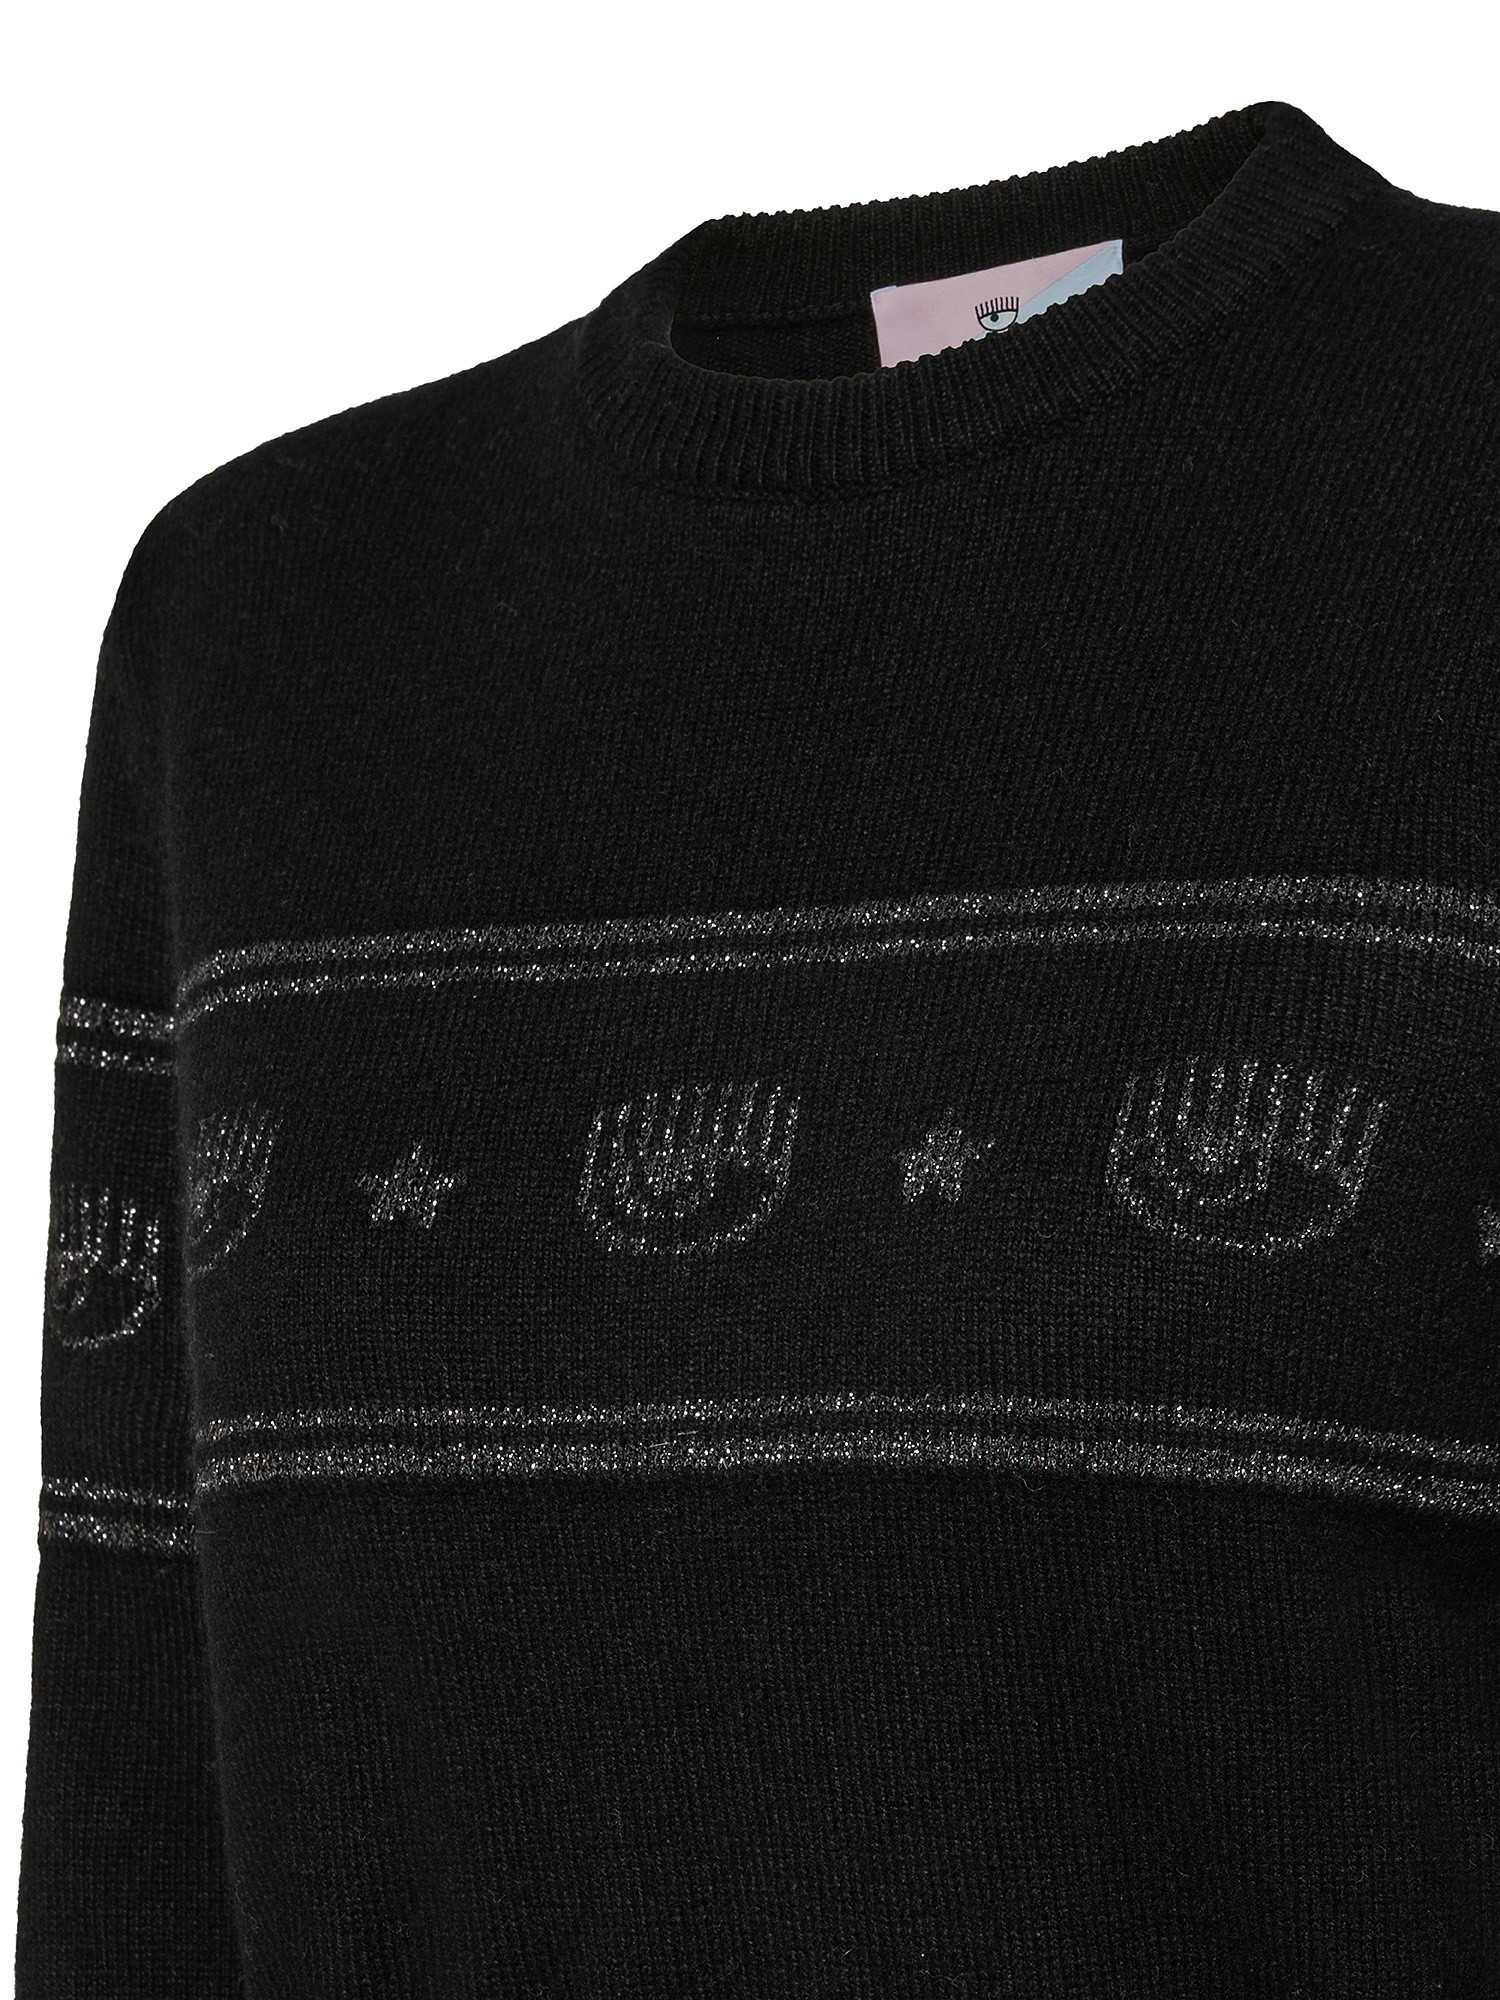 Sweater with logo, Black, large image number 2